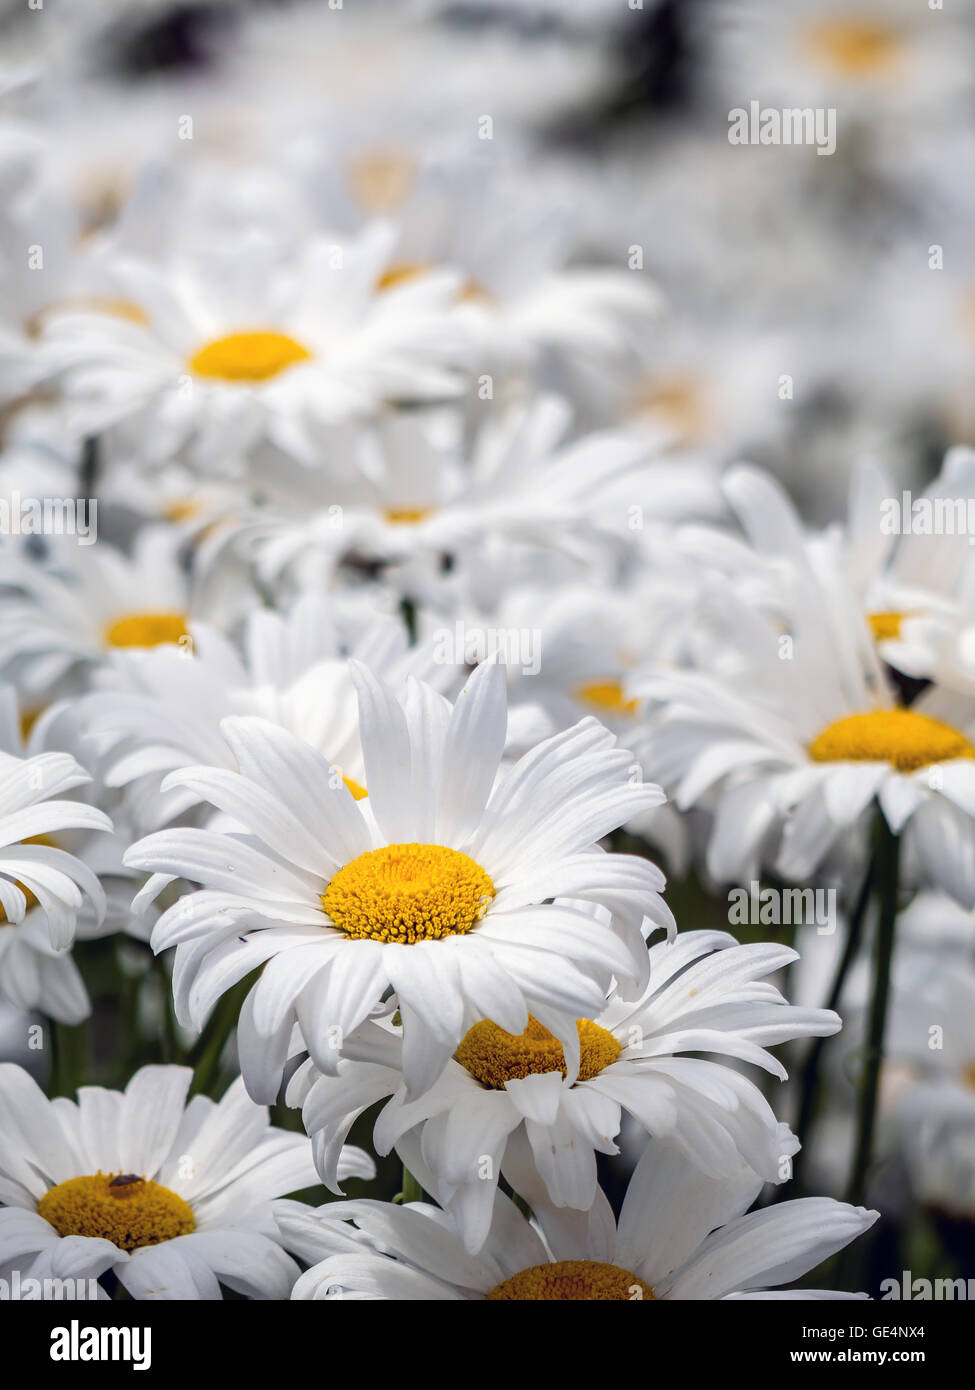 Bunch of fresh marguerite flowers growing in the garden Stock Photo